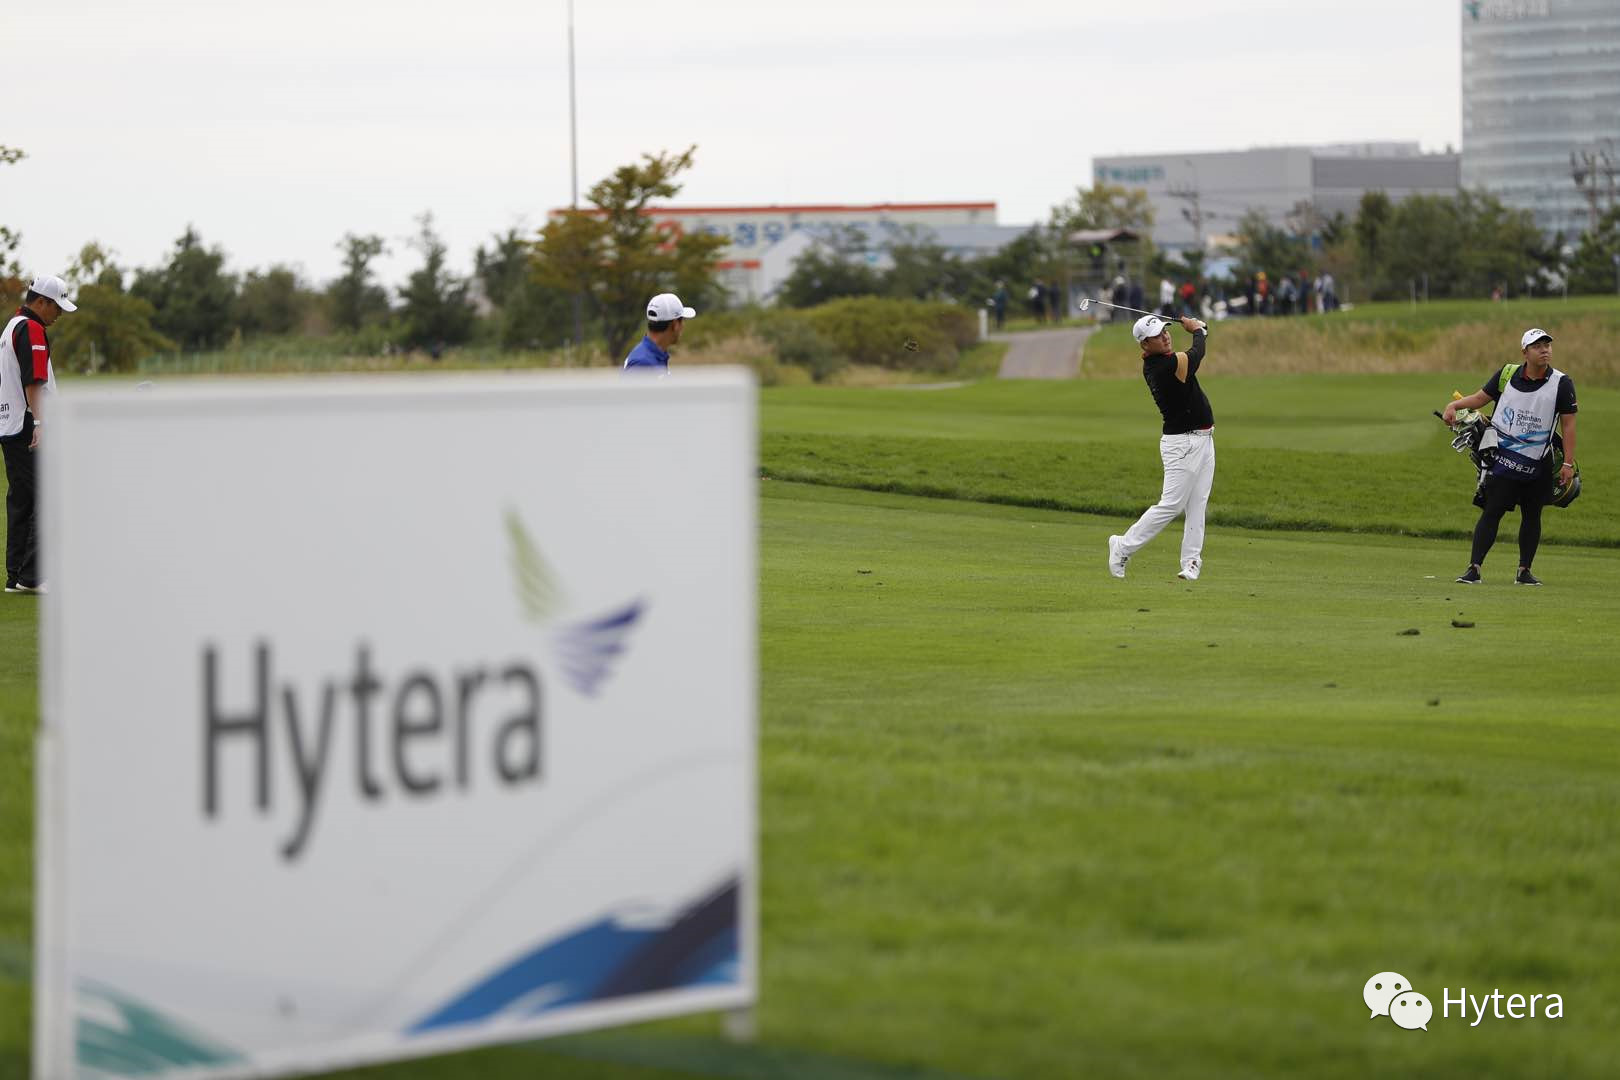 Hytera-PoC-Solution-Adopted-at-the-35th-Shinhan-Donghae-Golf-Open-1.jpg#asset:27501